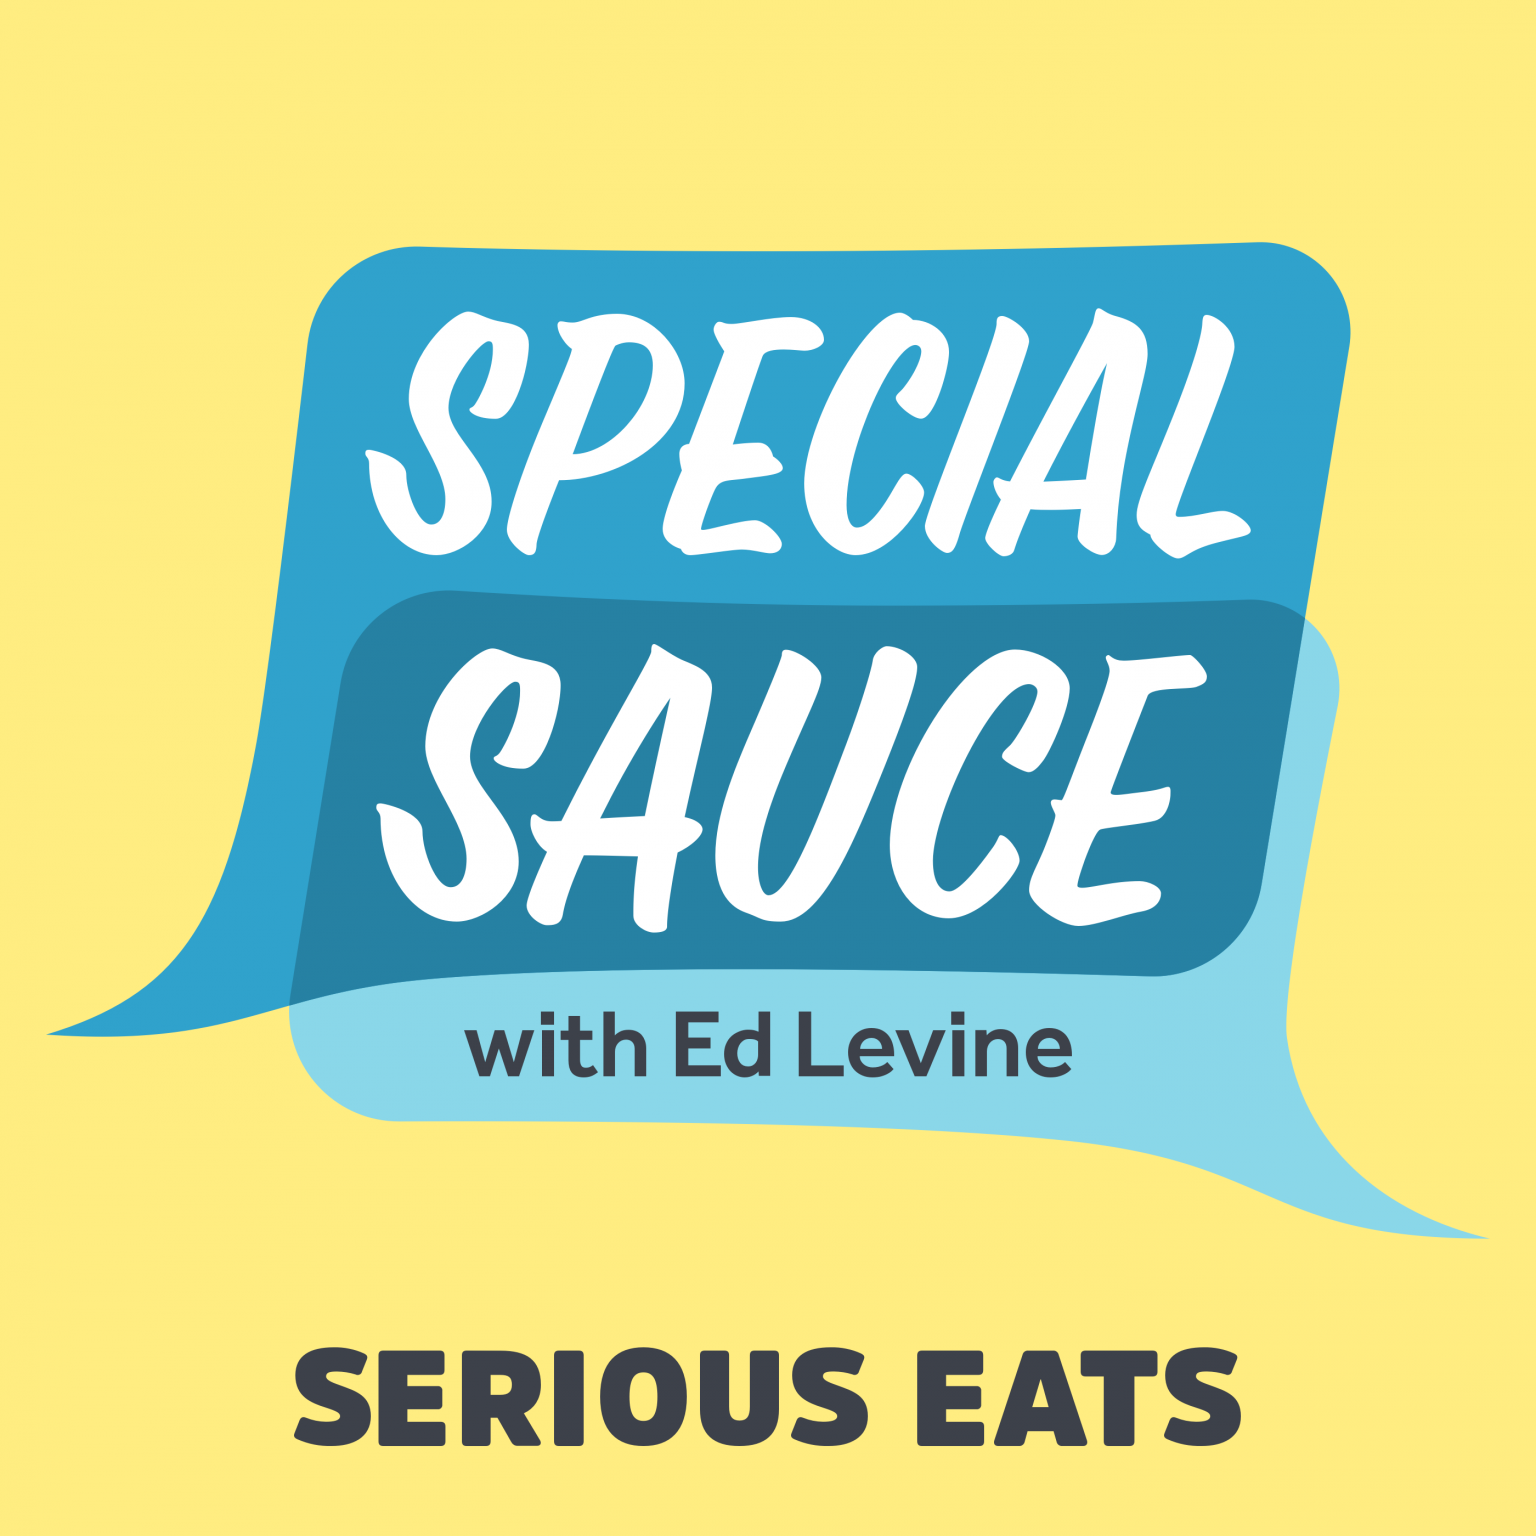 Special Sauce: Kenji on Eggs, Plus Wisdom From Two Master Bakers [2/2]